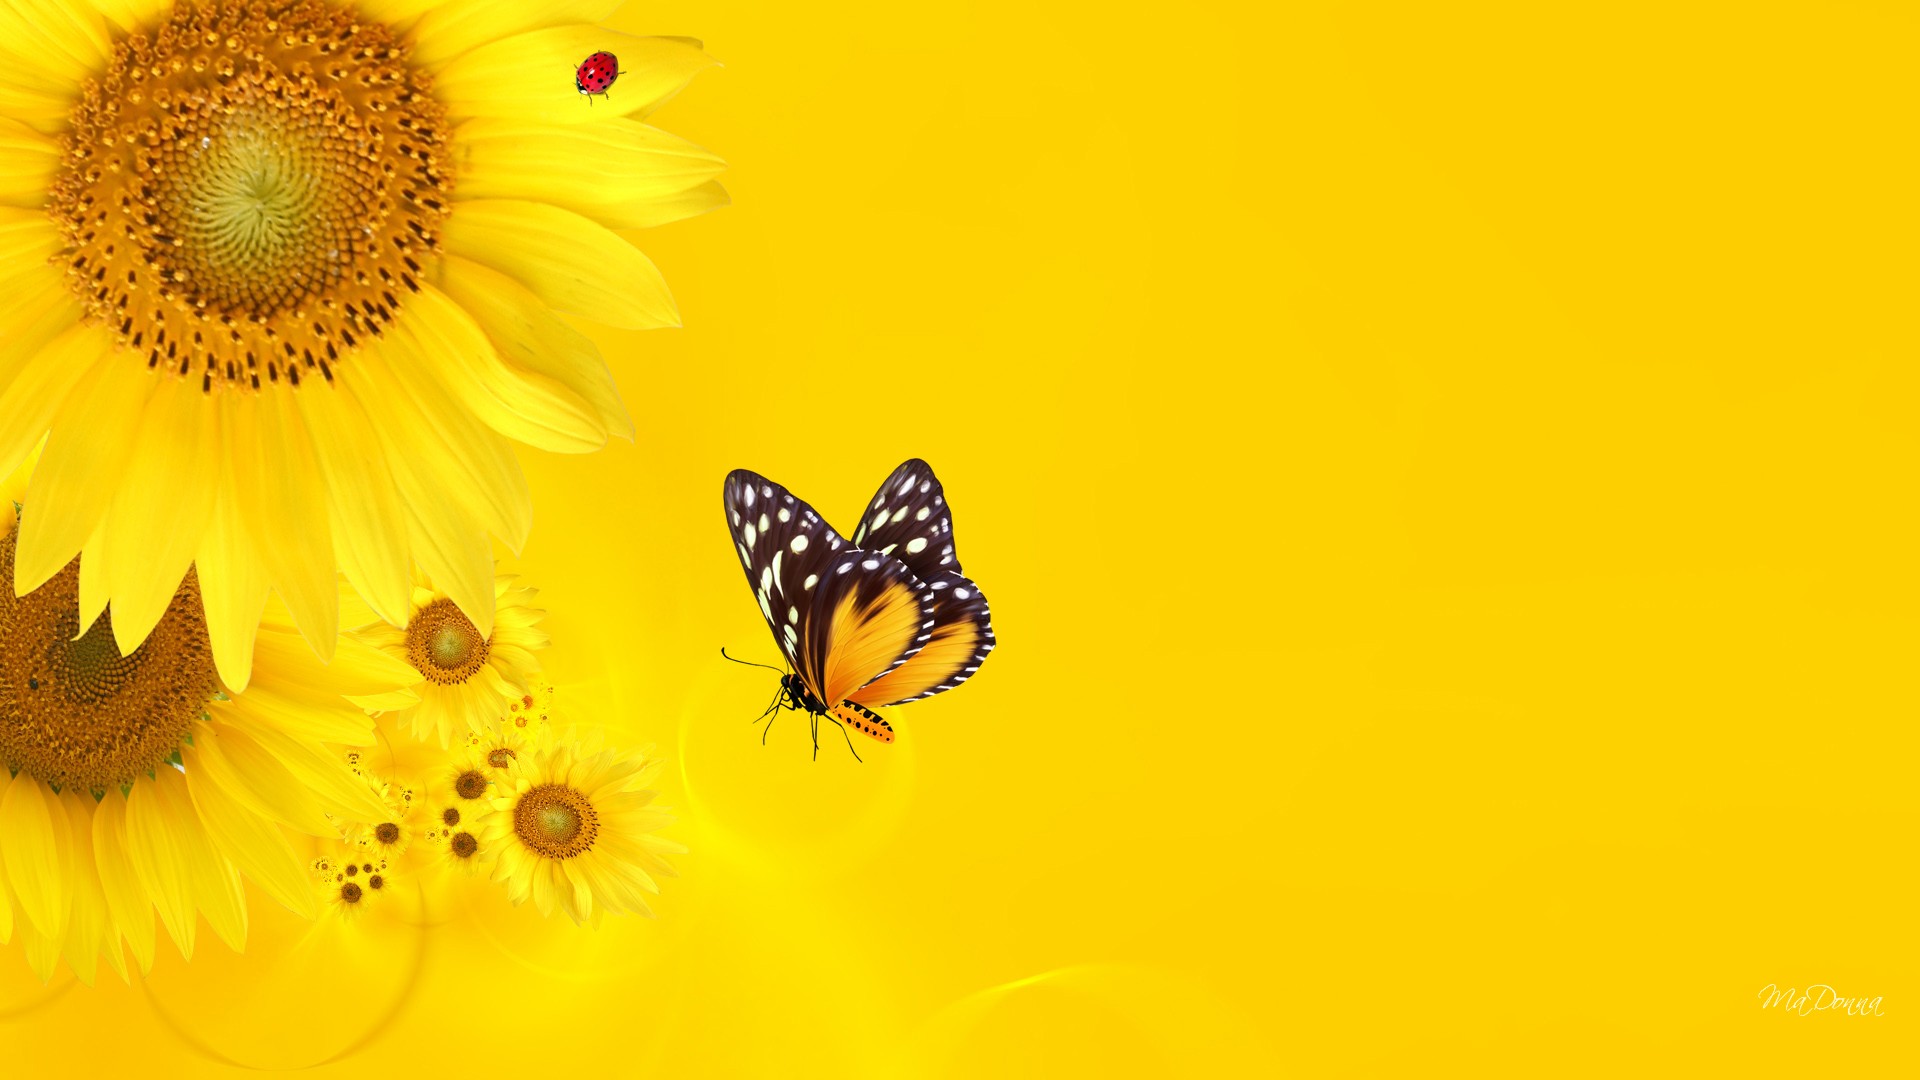 portrait mode wallpaper,cynthia (subgenus),butterfly,insect,yellow,macro photography